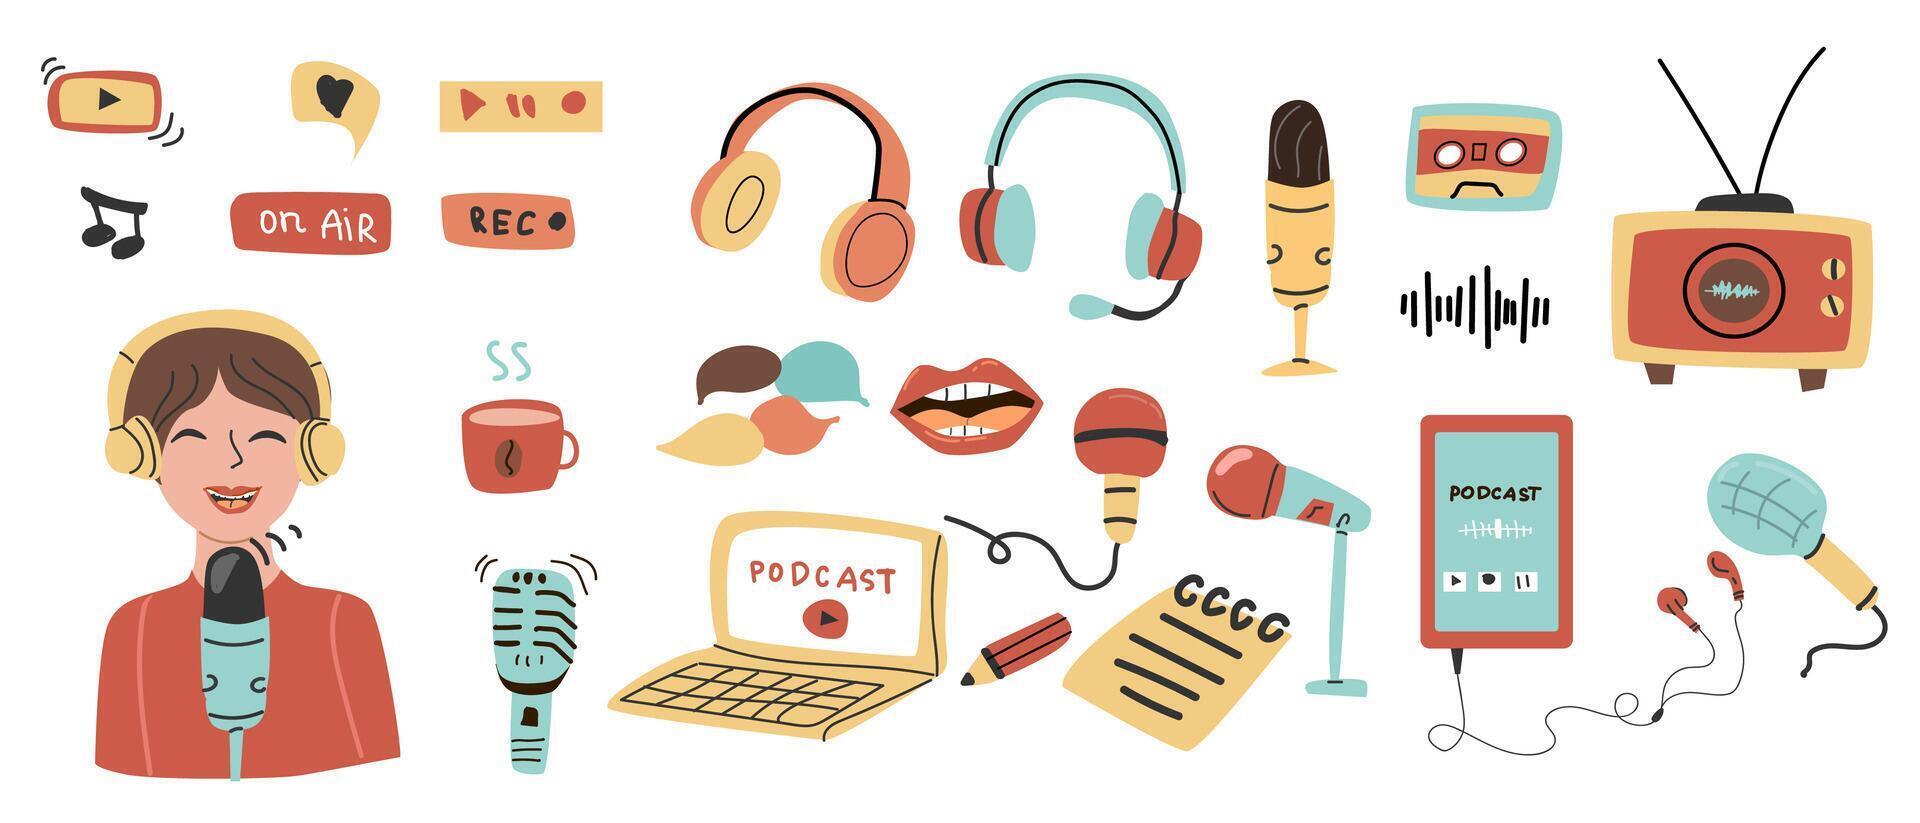 Hand drawn Podcast elements set with audio equipment and woman in flat style. Microphone, laptop, headphones, phone and earphones. Media equipment for audio and video recording, broadcasting. vector